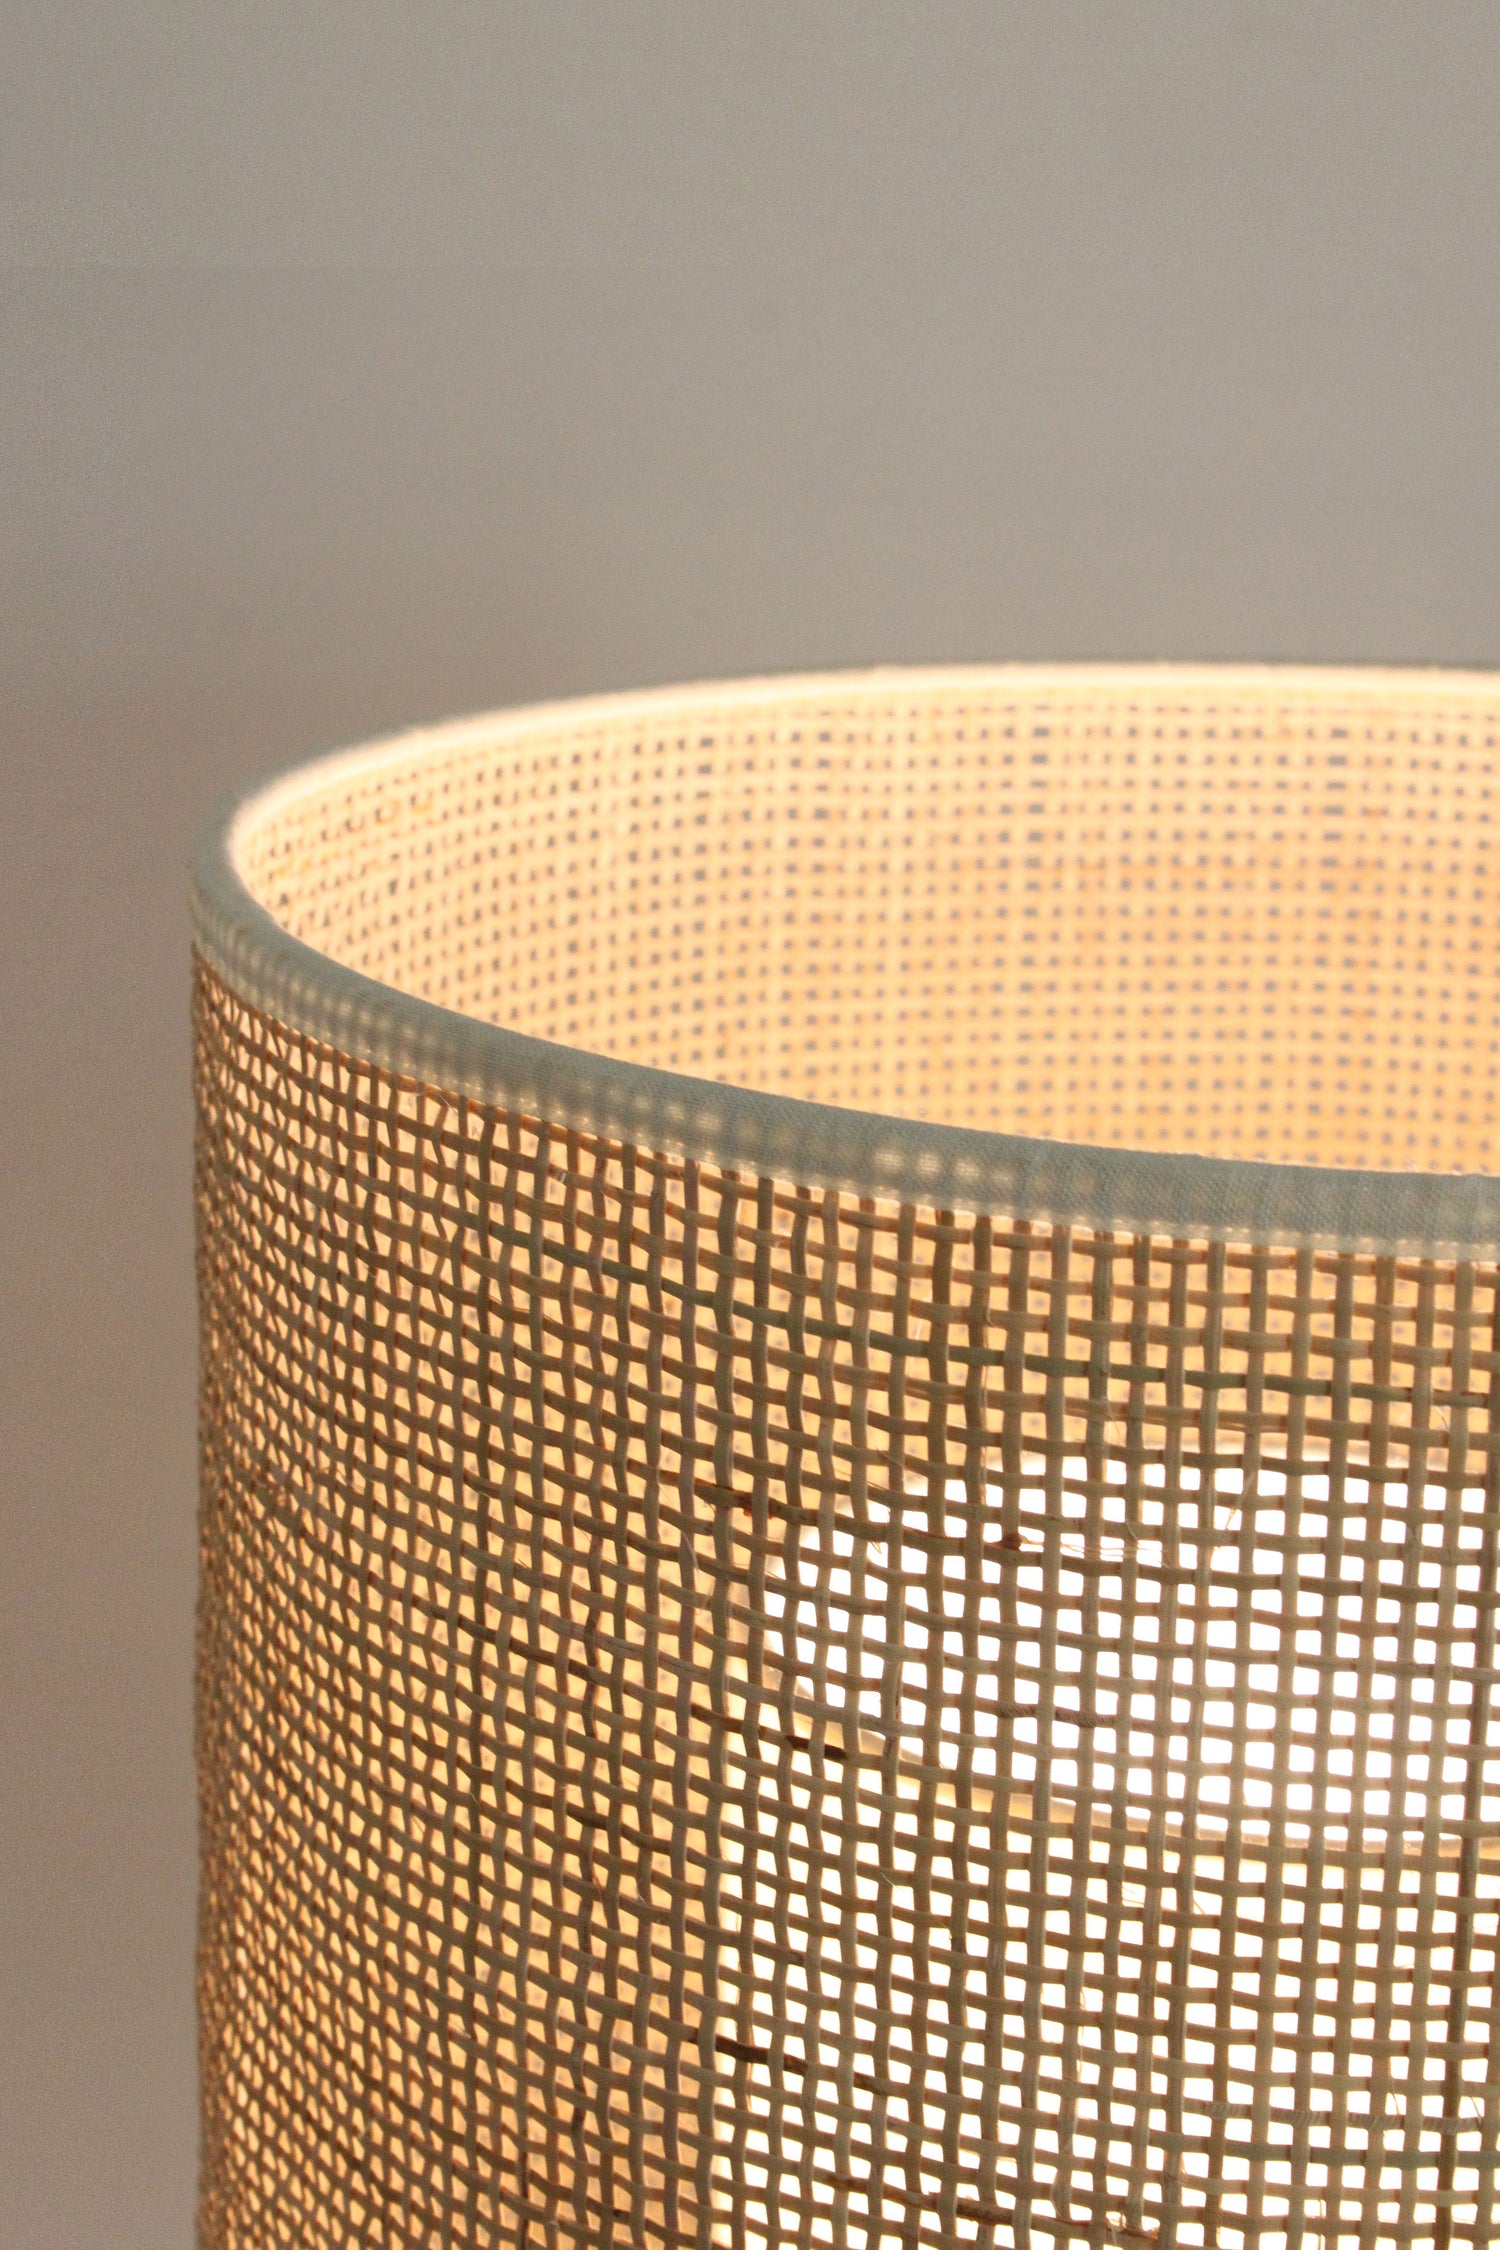 Gingham Table Lampshade